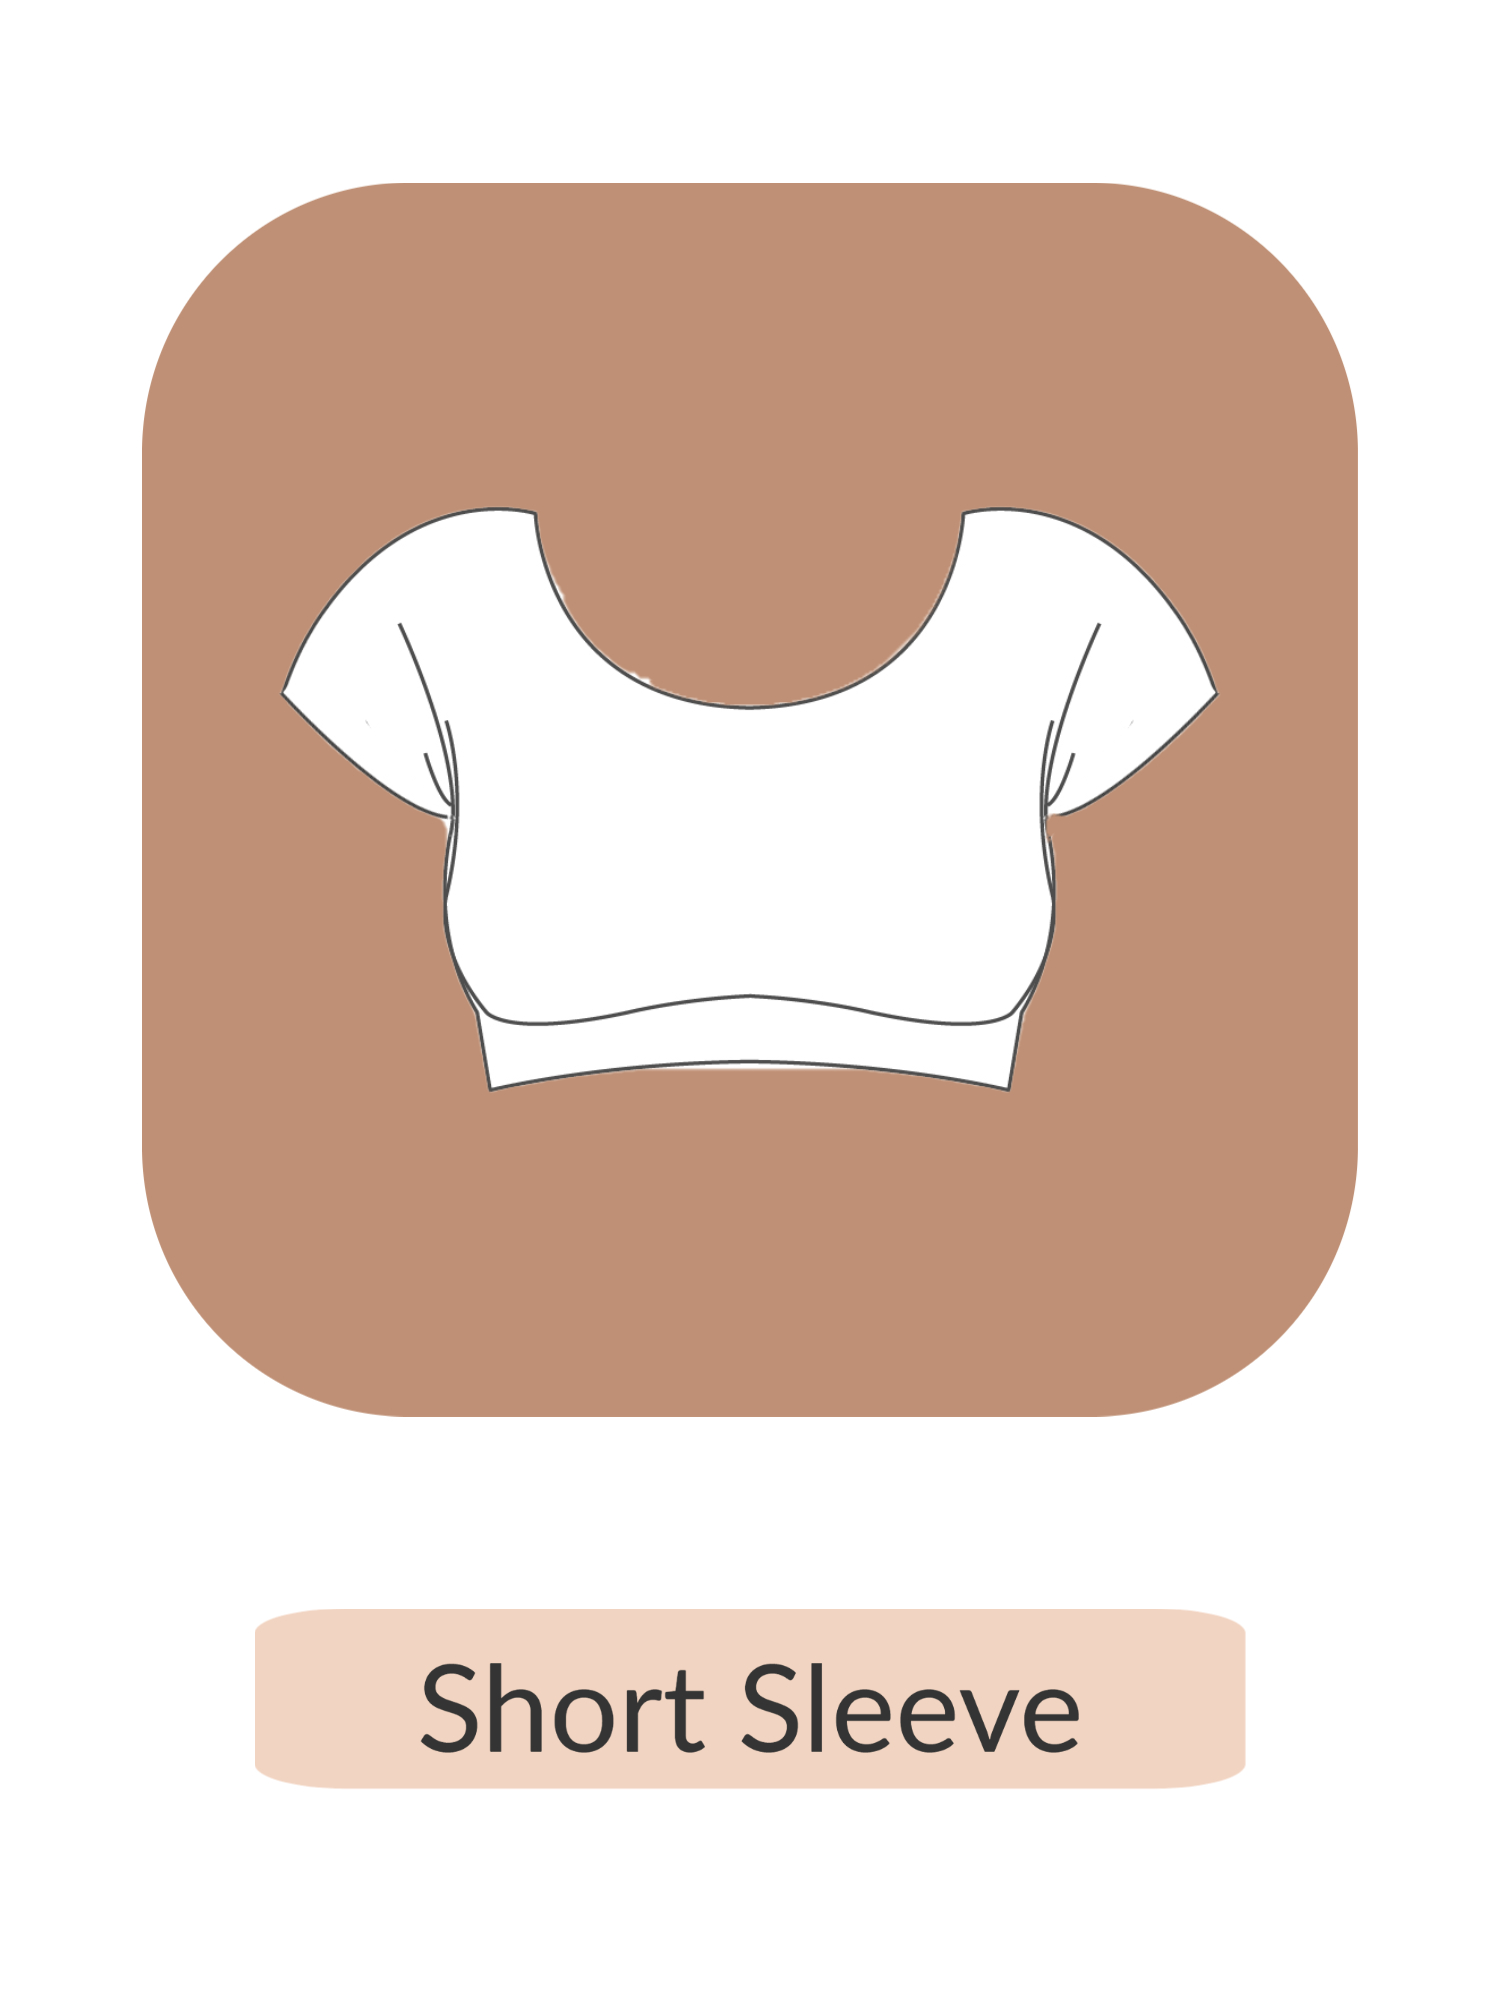 White sleeveless bra top with text 'Short Sleeve' on it.